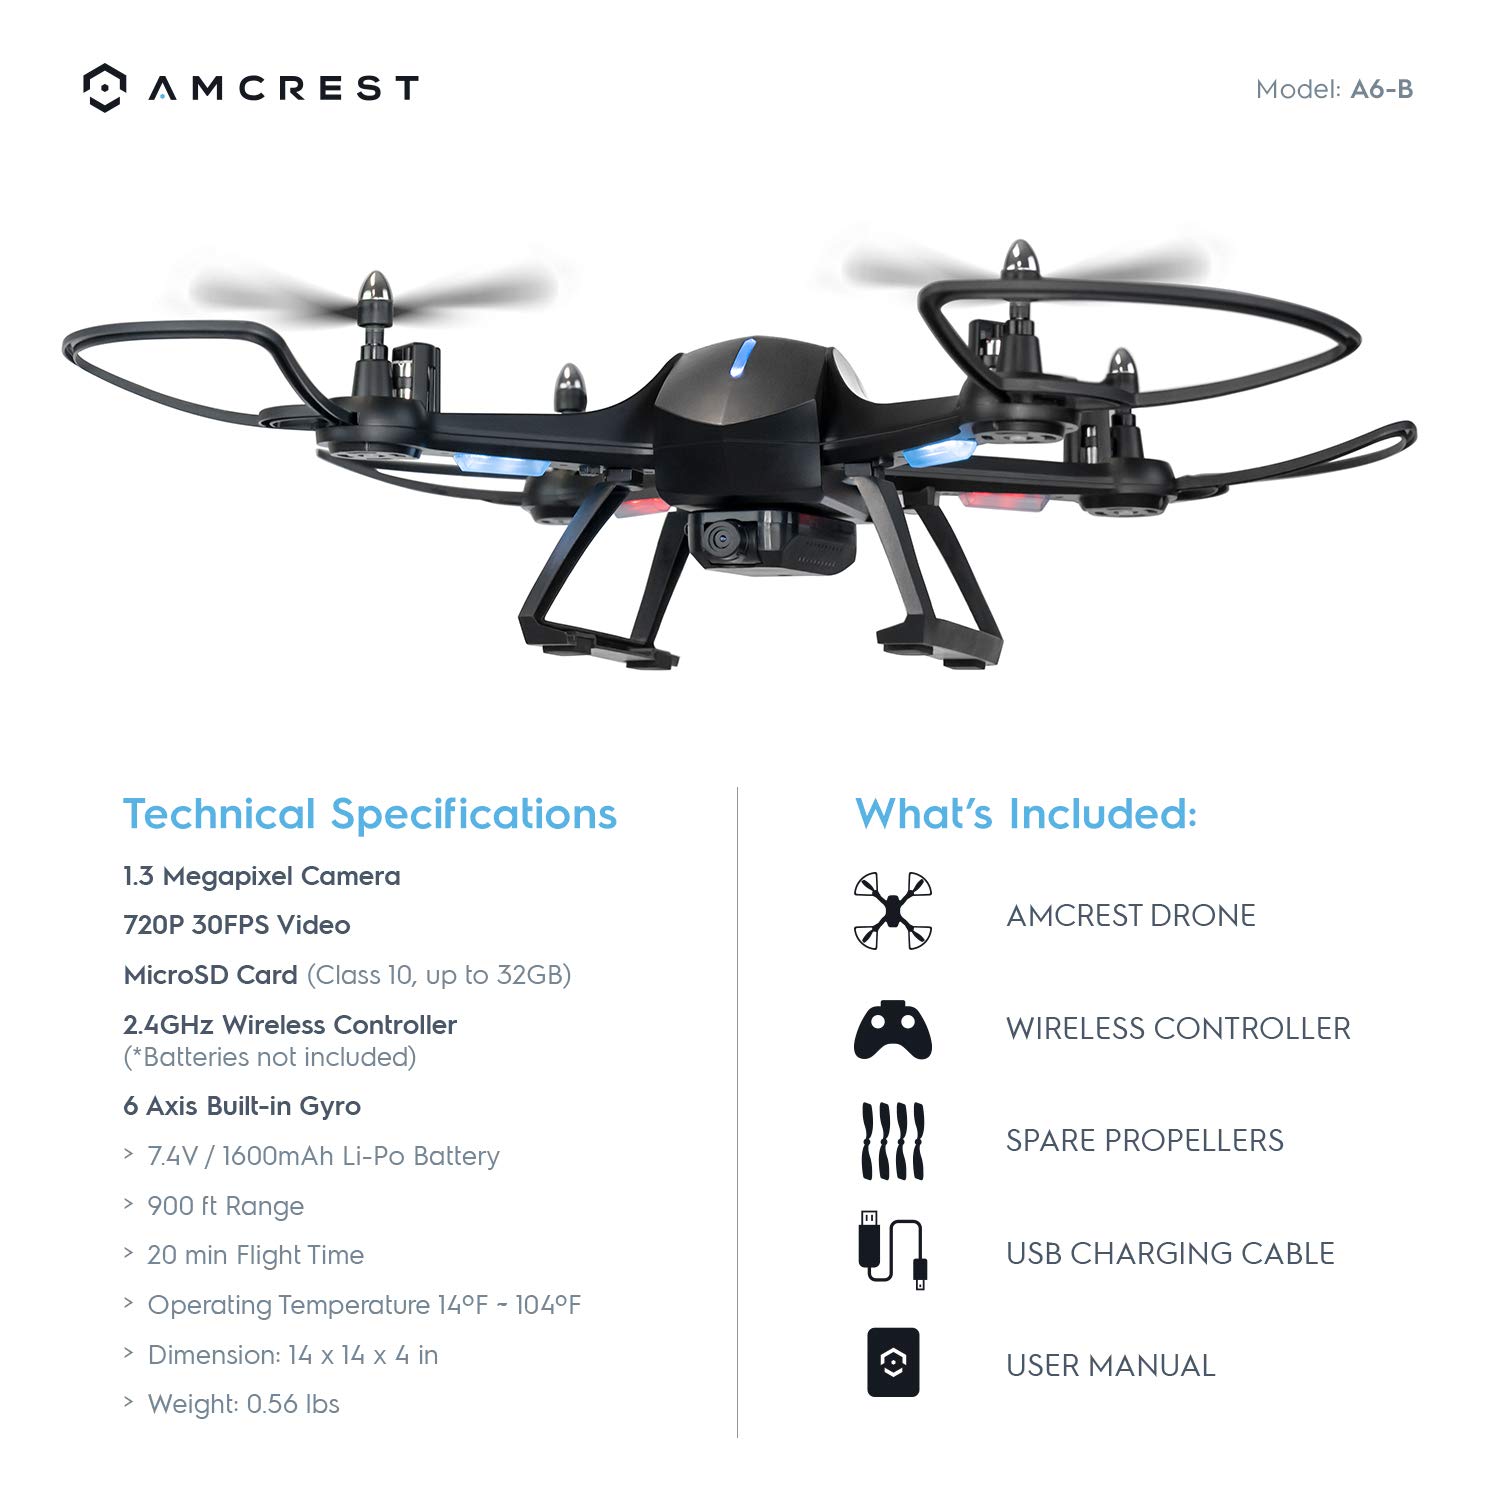 Amcrest A6-B Skyview Pro WiFi Drone with Camera HD 1.3MP FPV Quadcopter, RC + 2.4ghz WiFi Helicopter w/Remote Control, Headless Mode, Smartphone (Black) - image 2 of 6